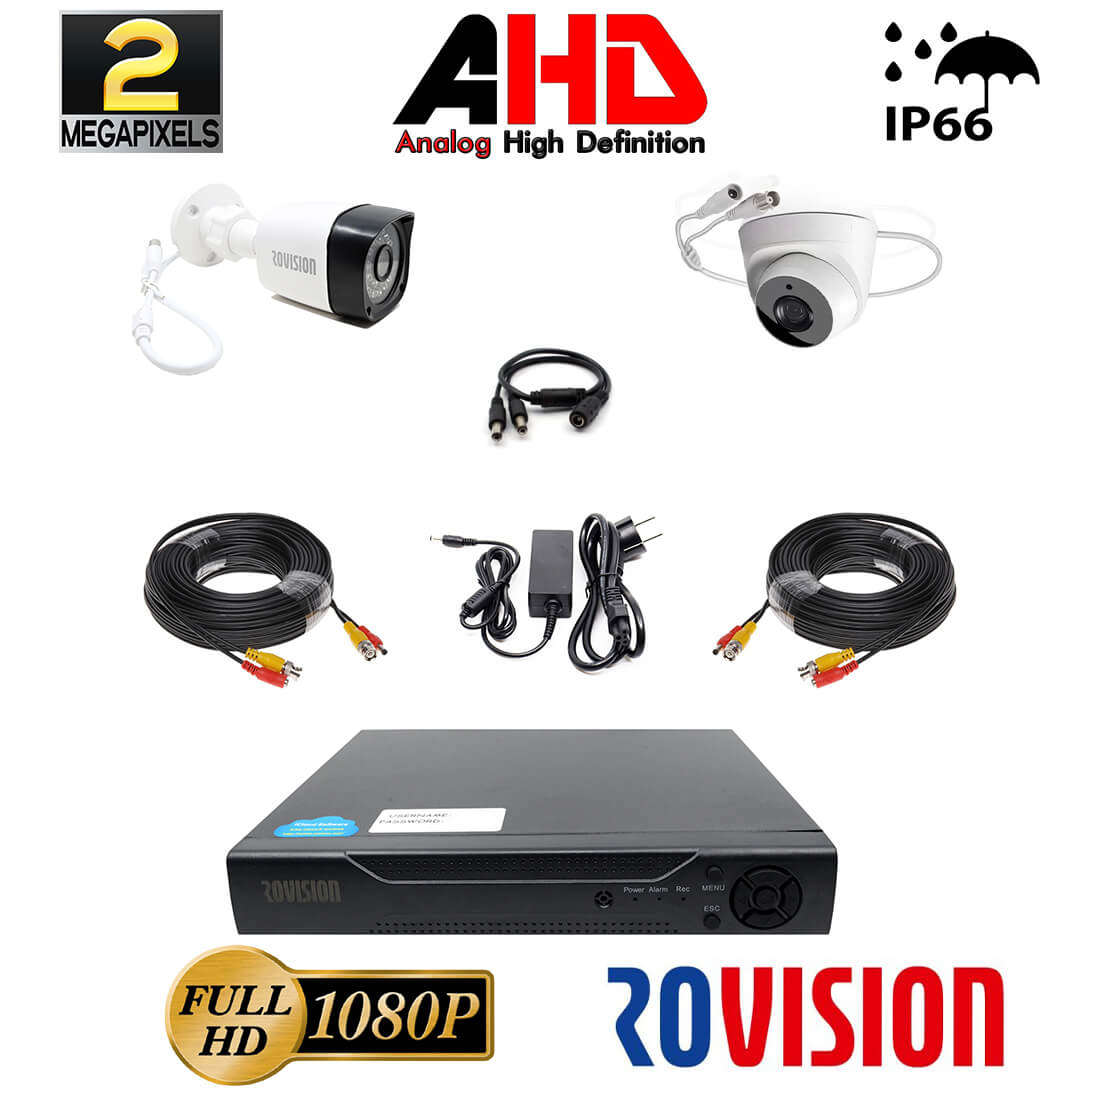 Kit supraveghere video mixt 2 camere 1 Hikvision exterior 20m IR si 1 interior Rovision, DVR 4 canale Hikvision Hikvision 201...